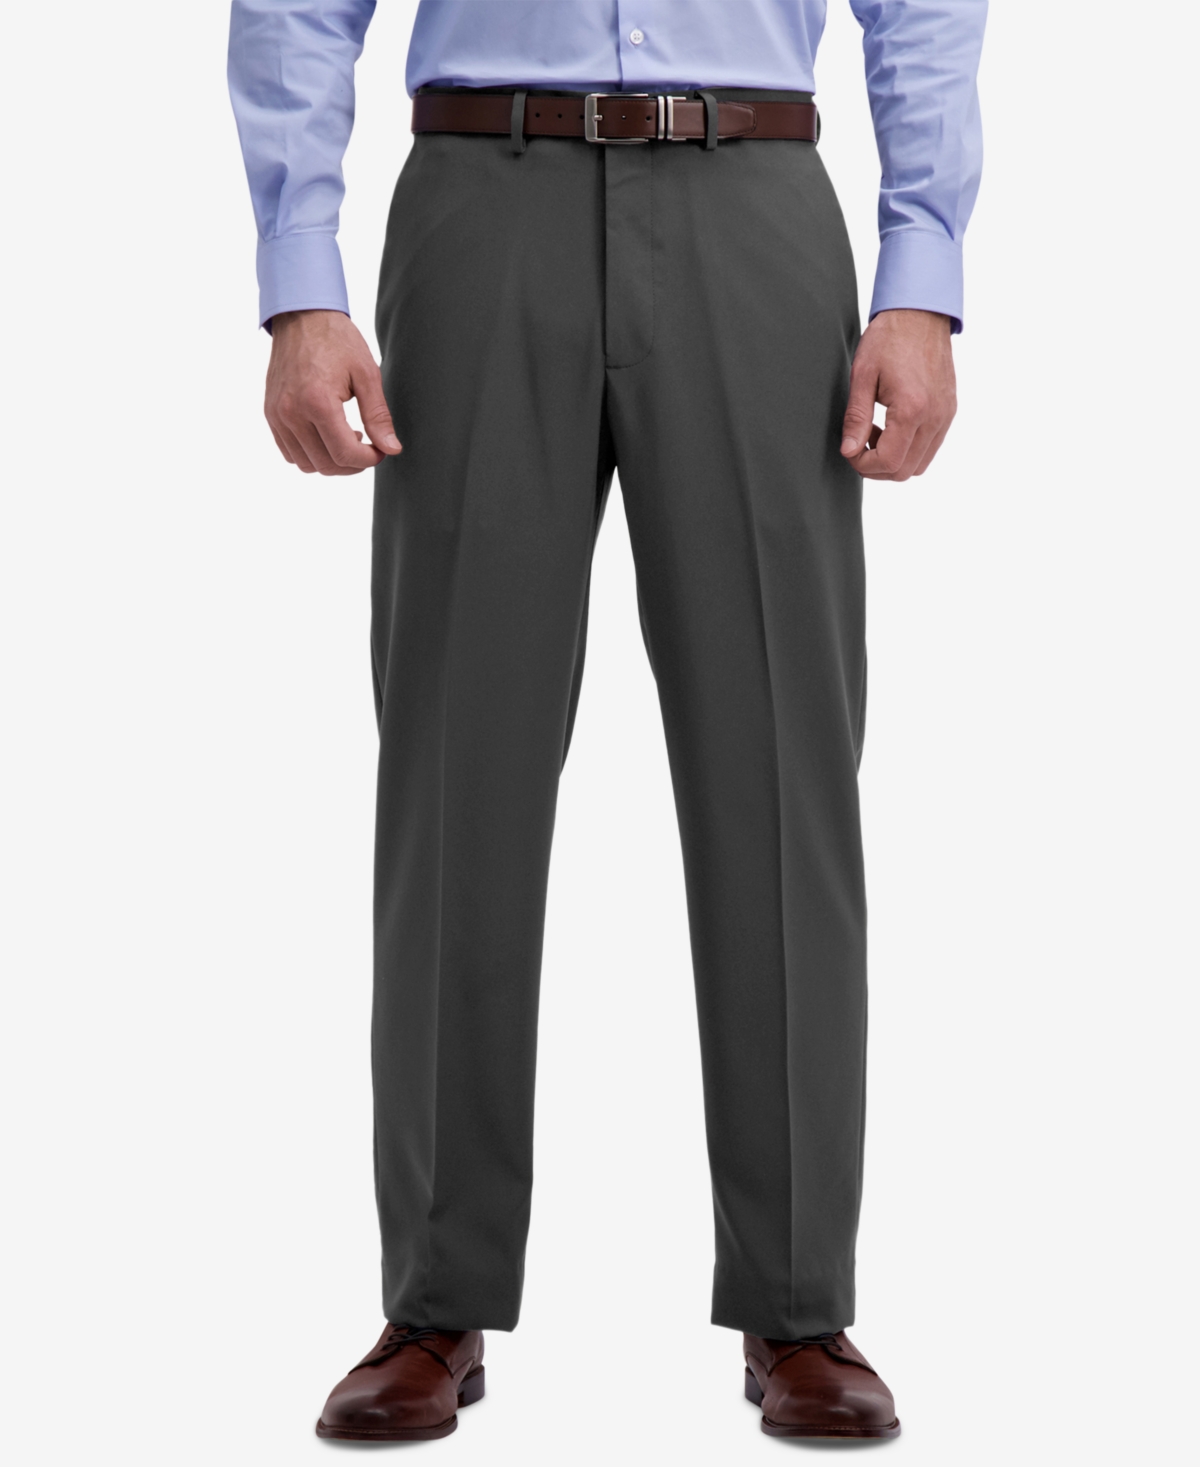 Microfiber Performance Classic-Fit Dress Pants, Created for Macy's - Grey